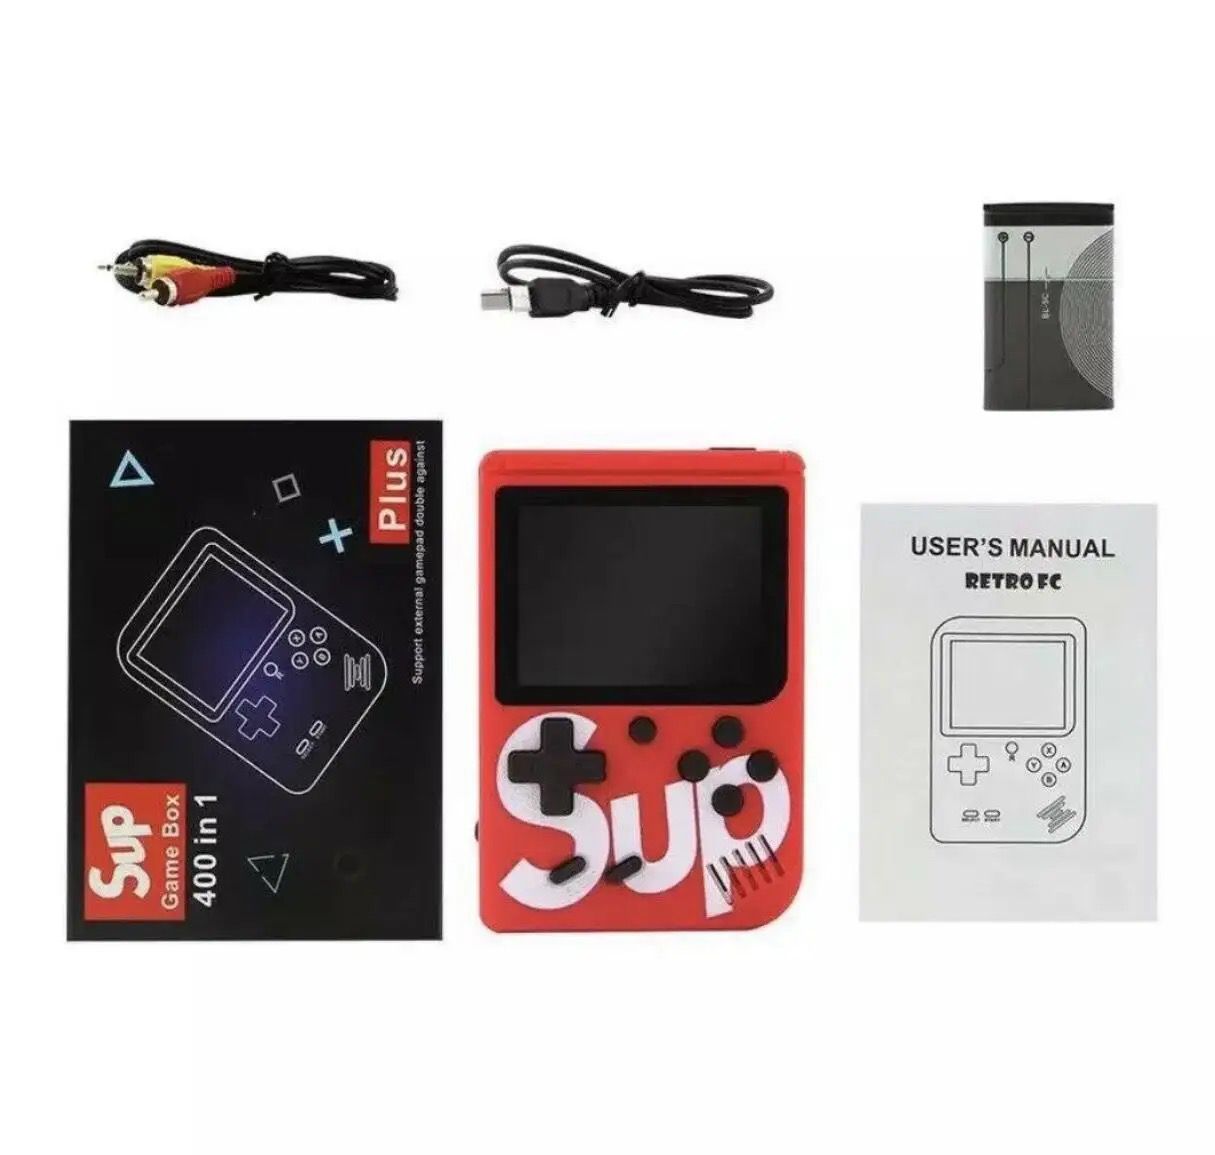 SUP 400 in 1 Game Box Console - SuperHub